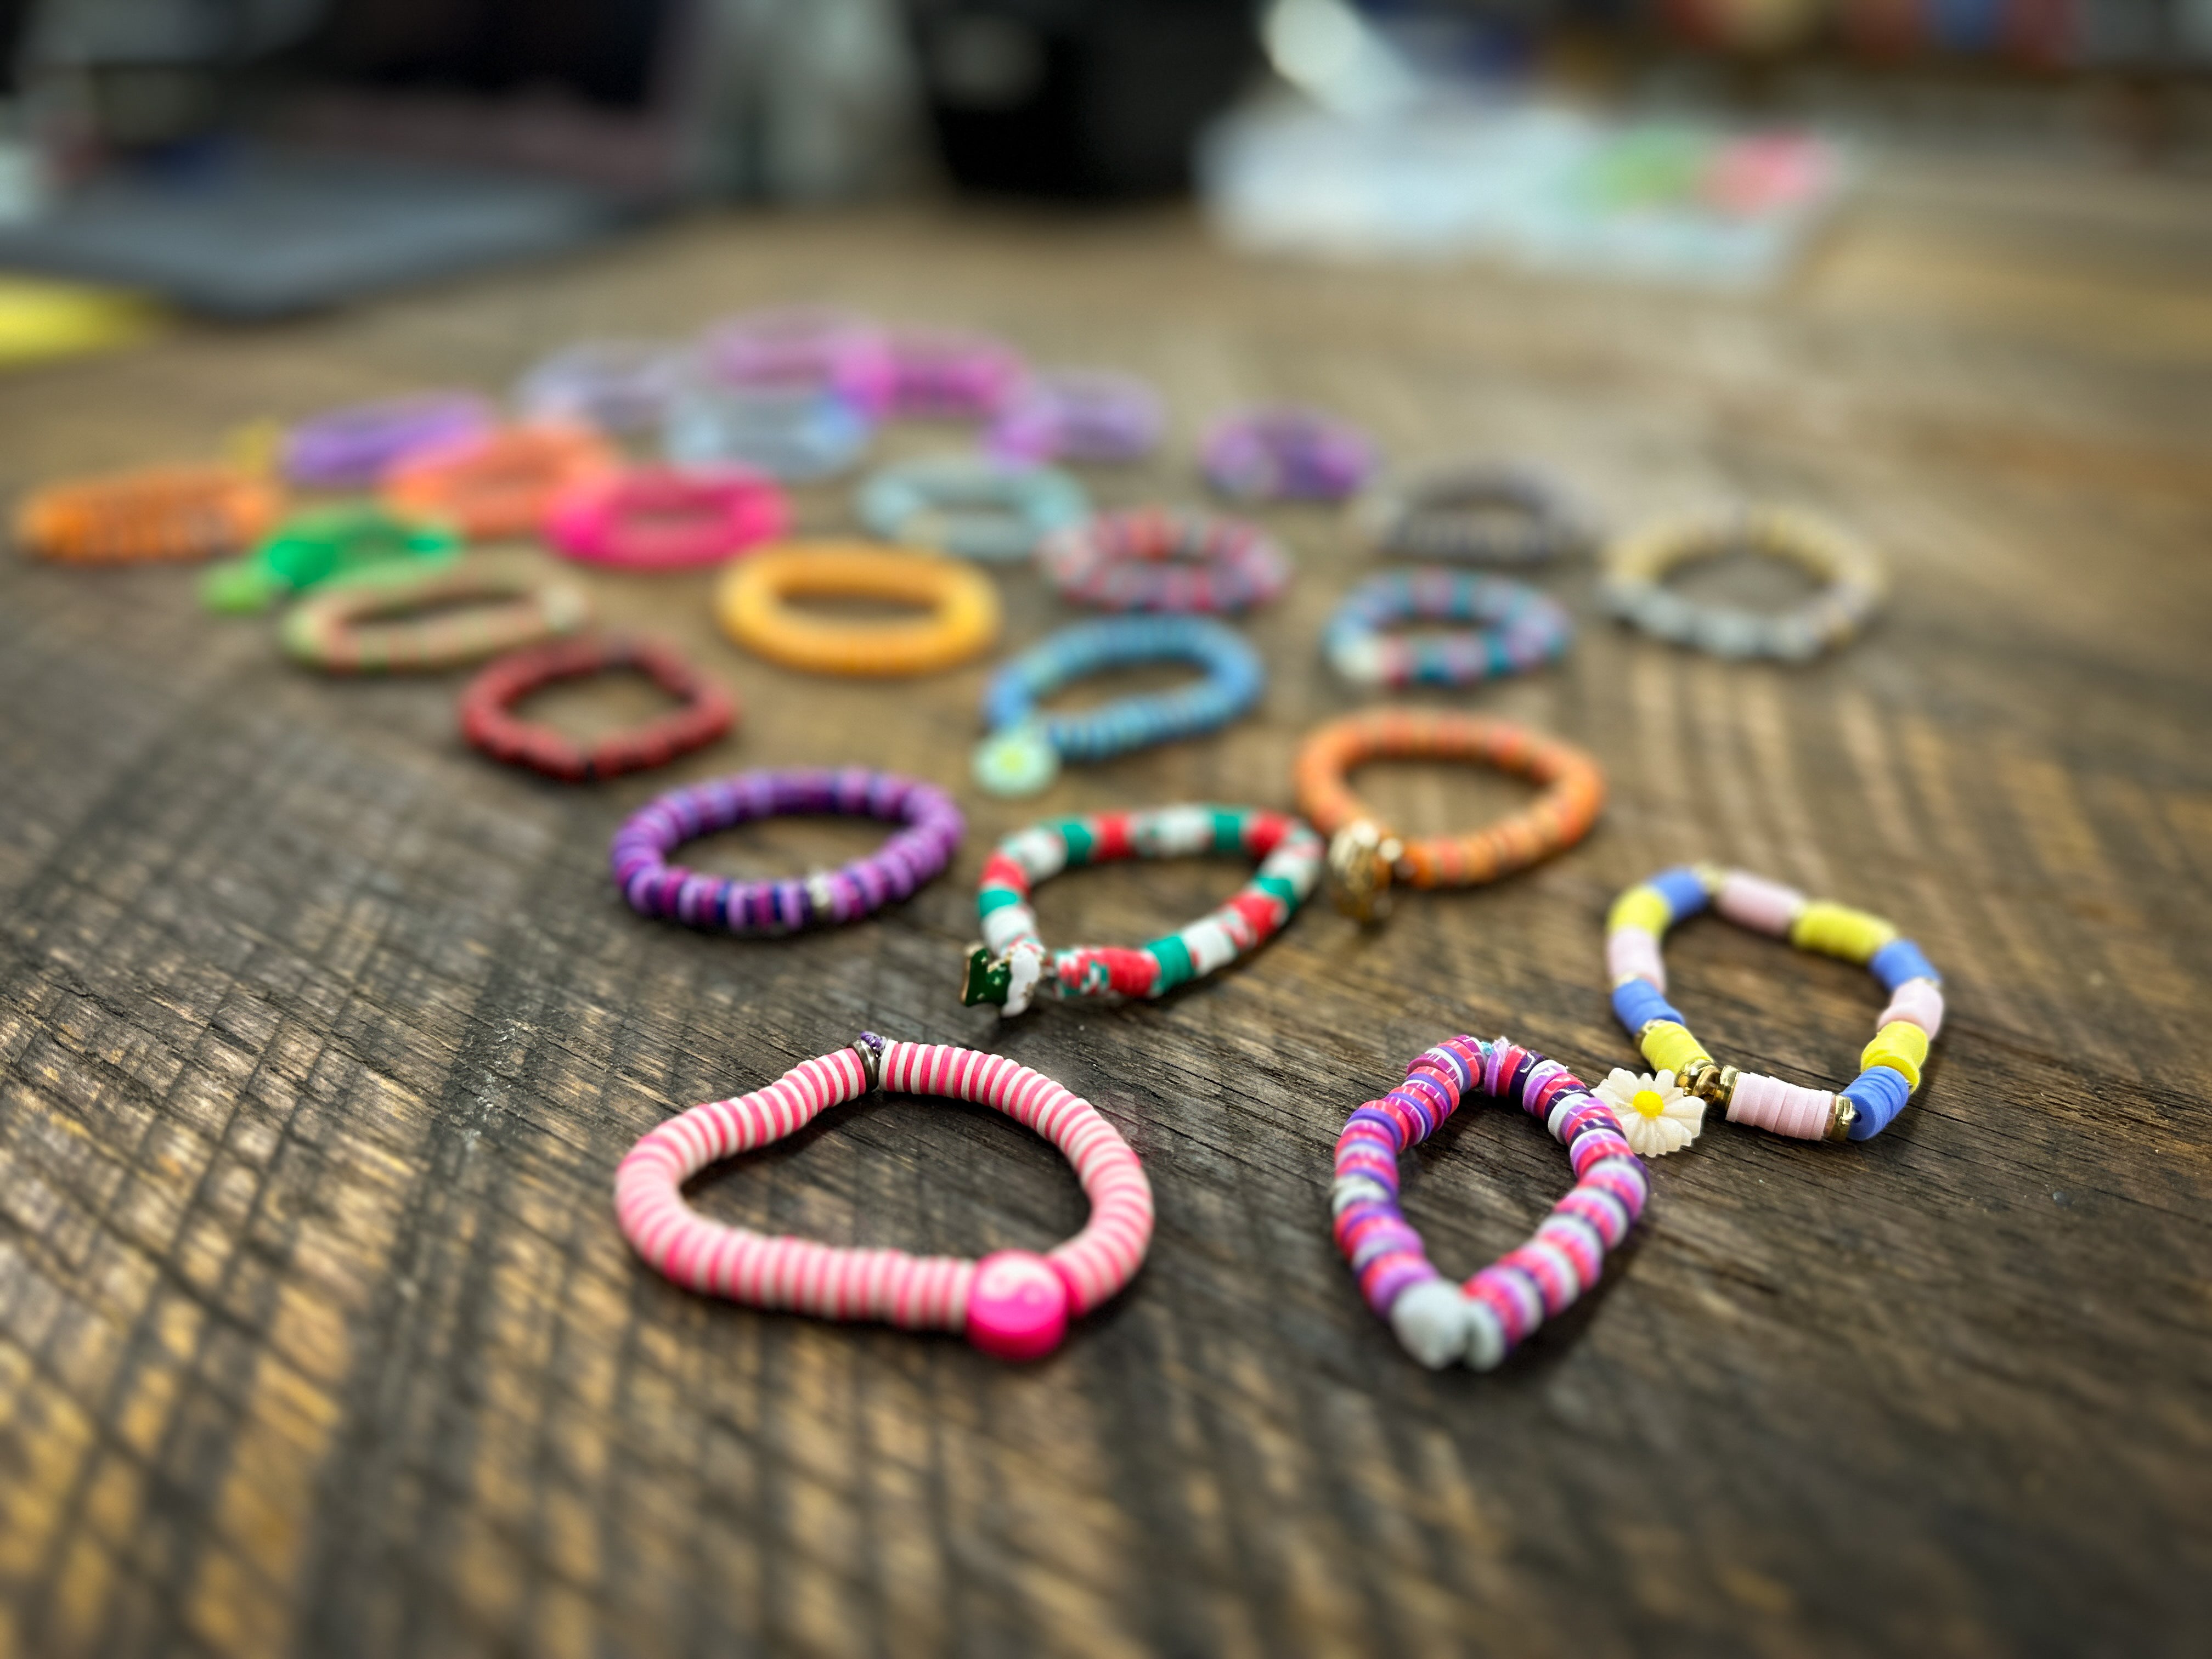 Sunlets - Bracelets by Addison to Support Riley Children's Hospital - Shipped